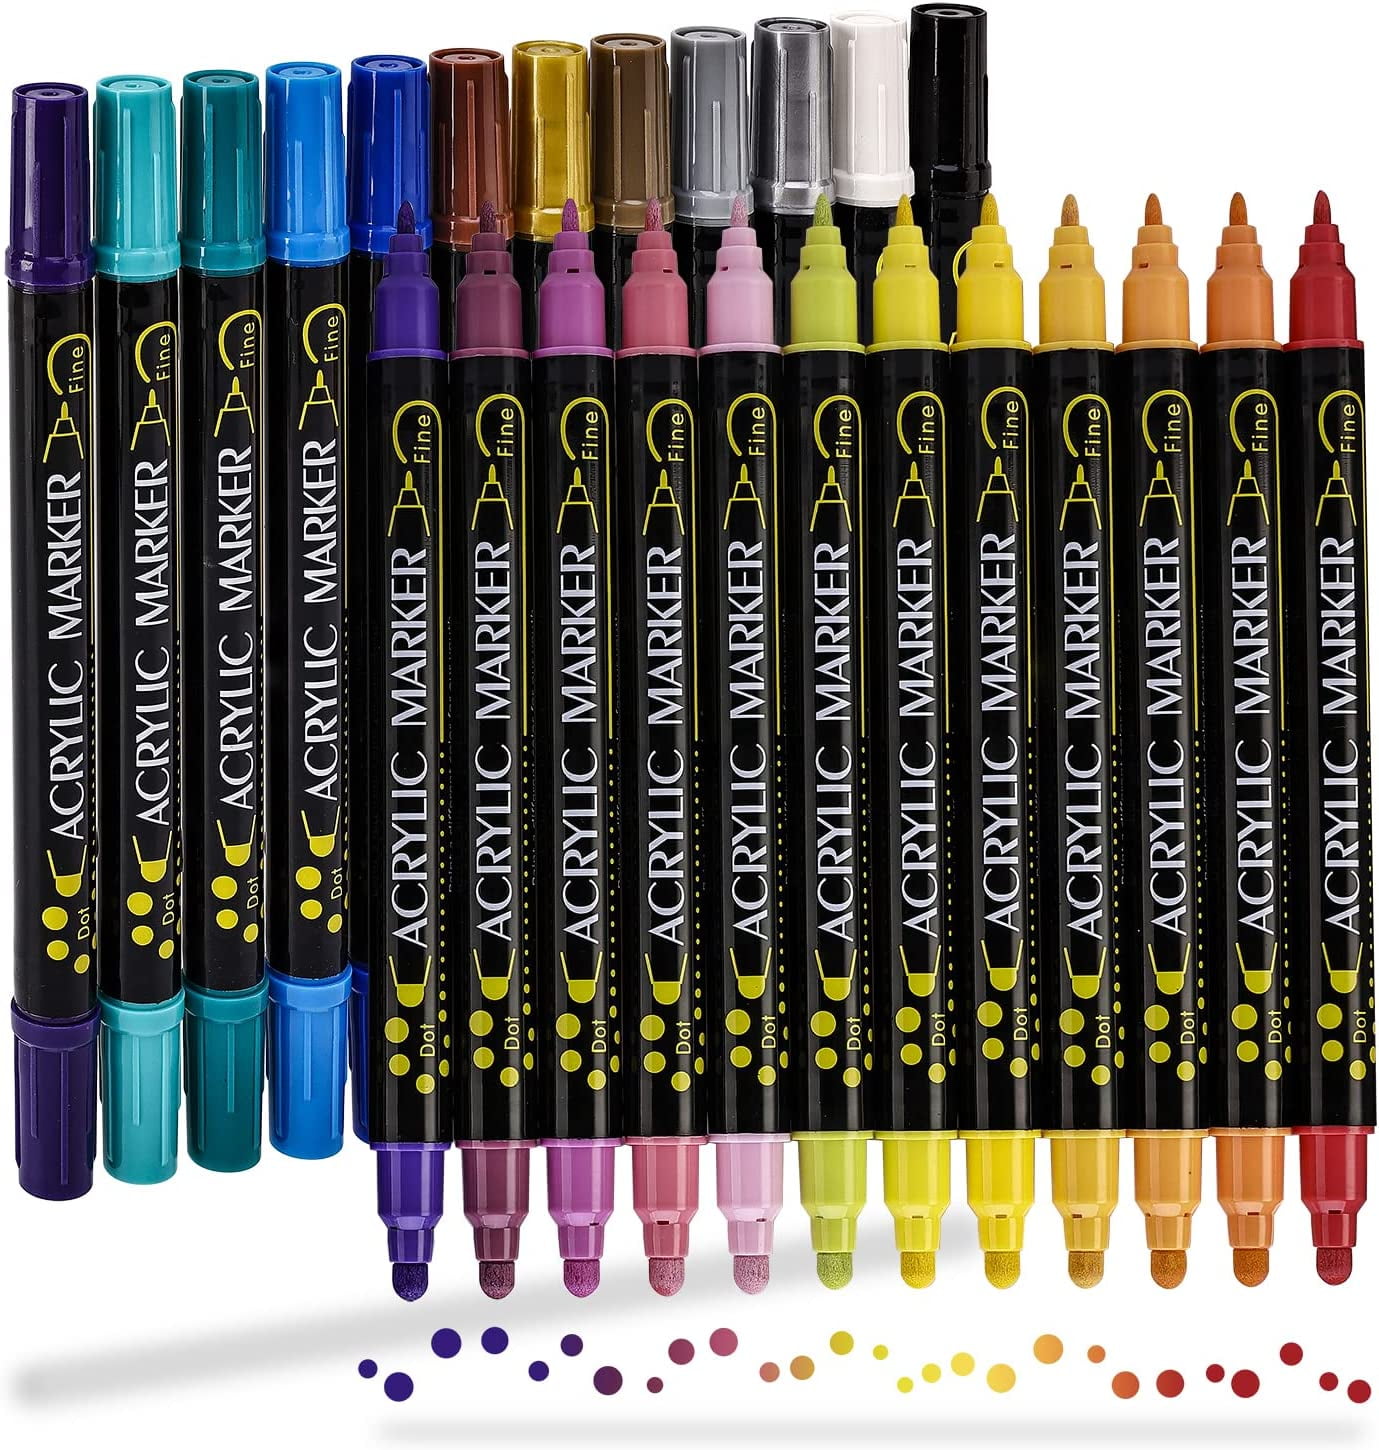 Artouch Acrylic Paint Pens - 24 Pcs Dual Tip Acrylic Paint Markers with Medium and Brush Tips, Ideal for Rock Painting, Ceramic, Wood, Brush Lettering